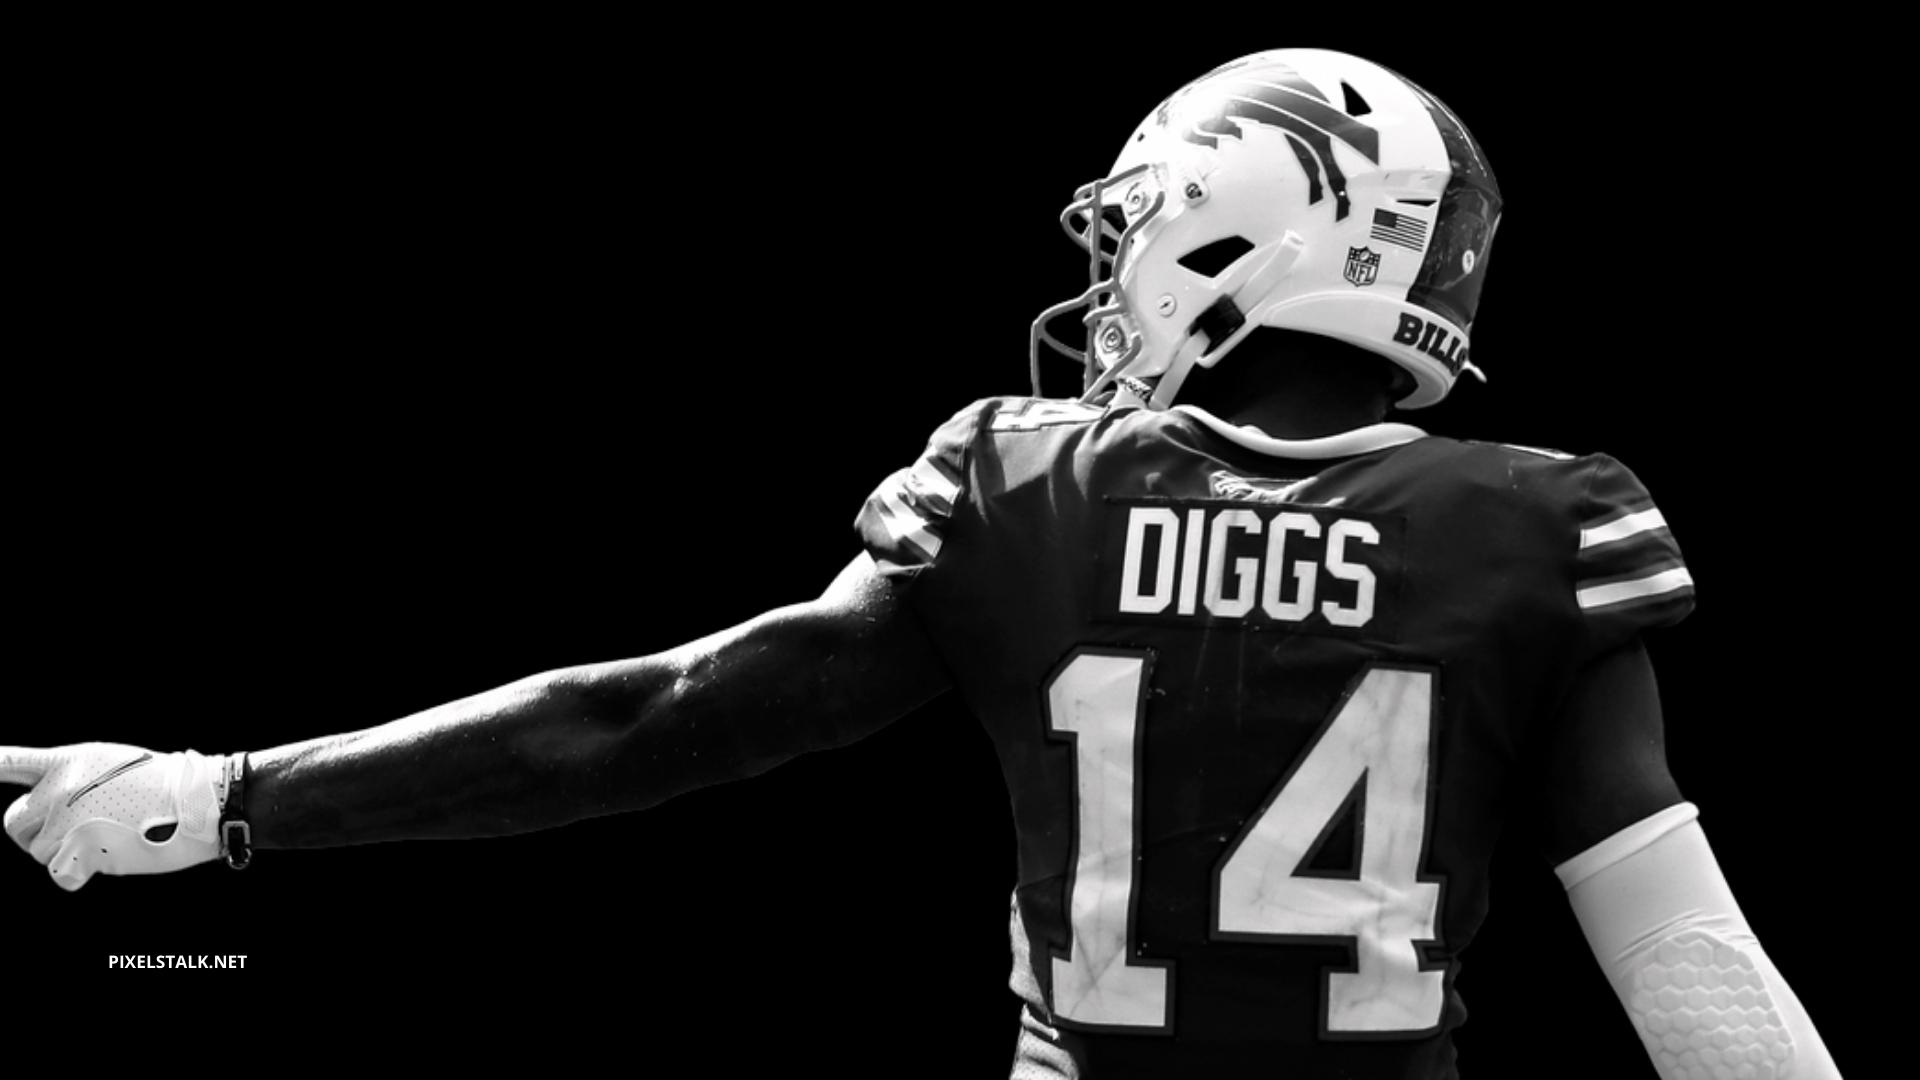 Stefon Diggs Wallpapers  Top 33 Best Stefon Diggs Wallpapers  HQ 